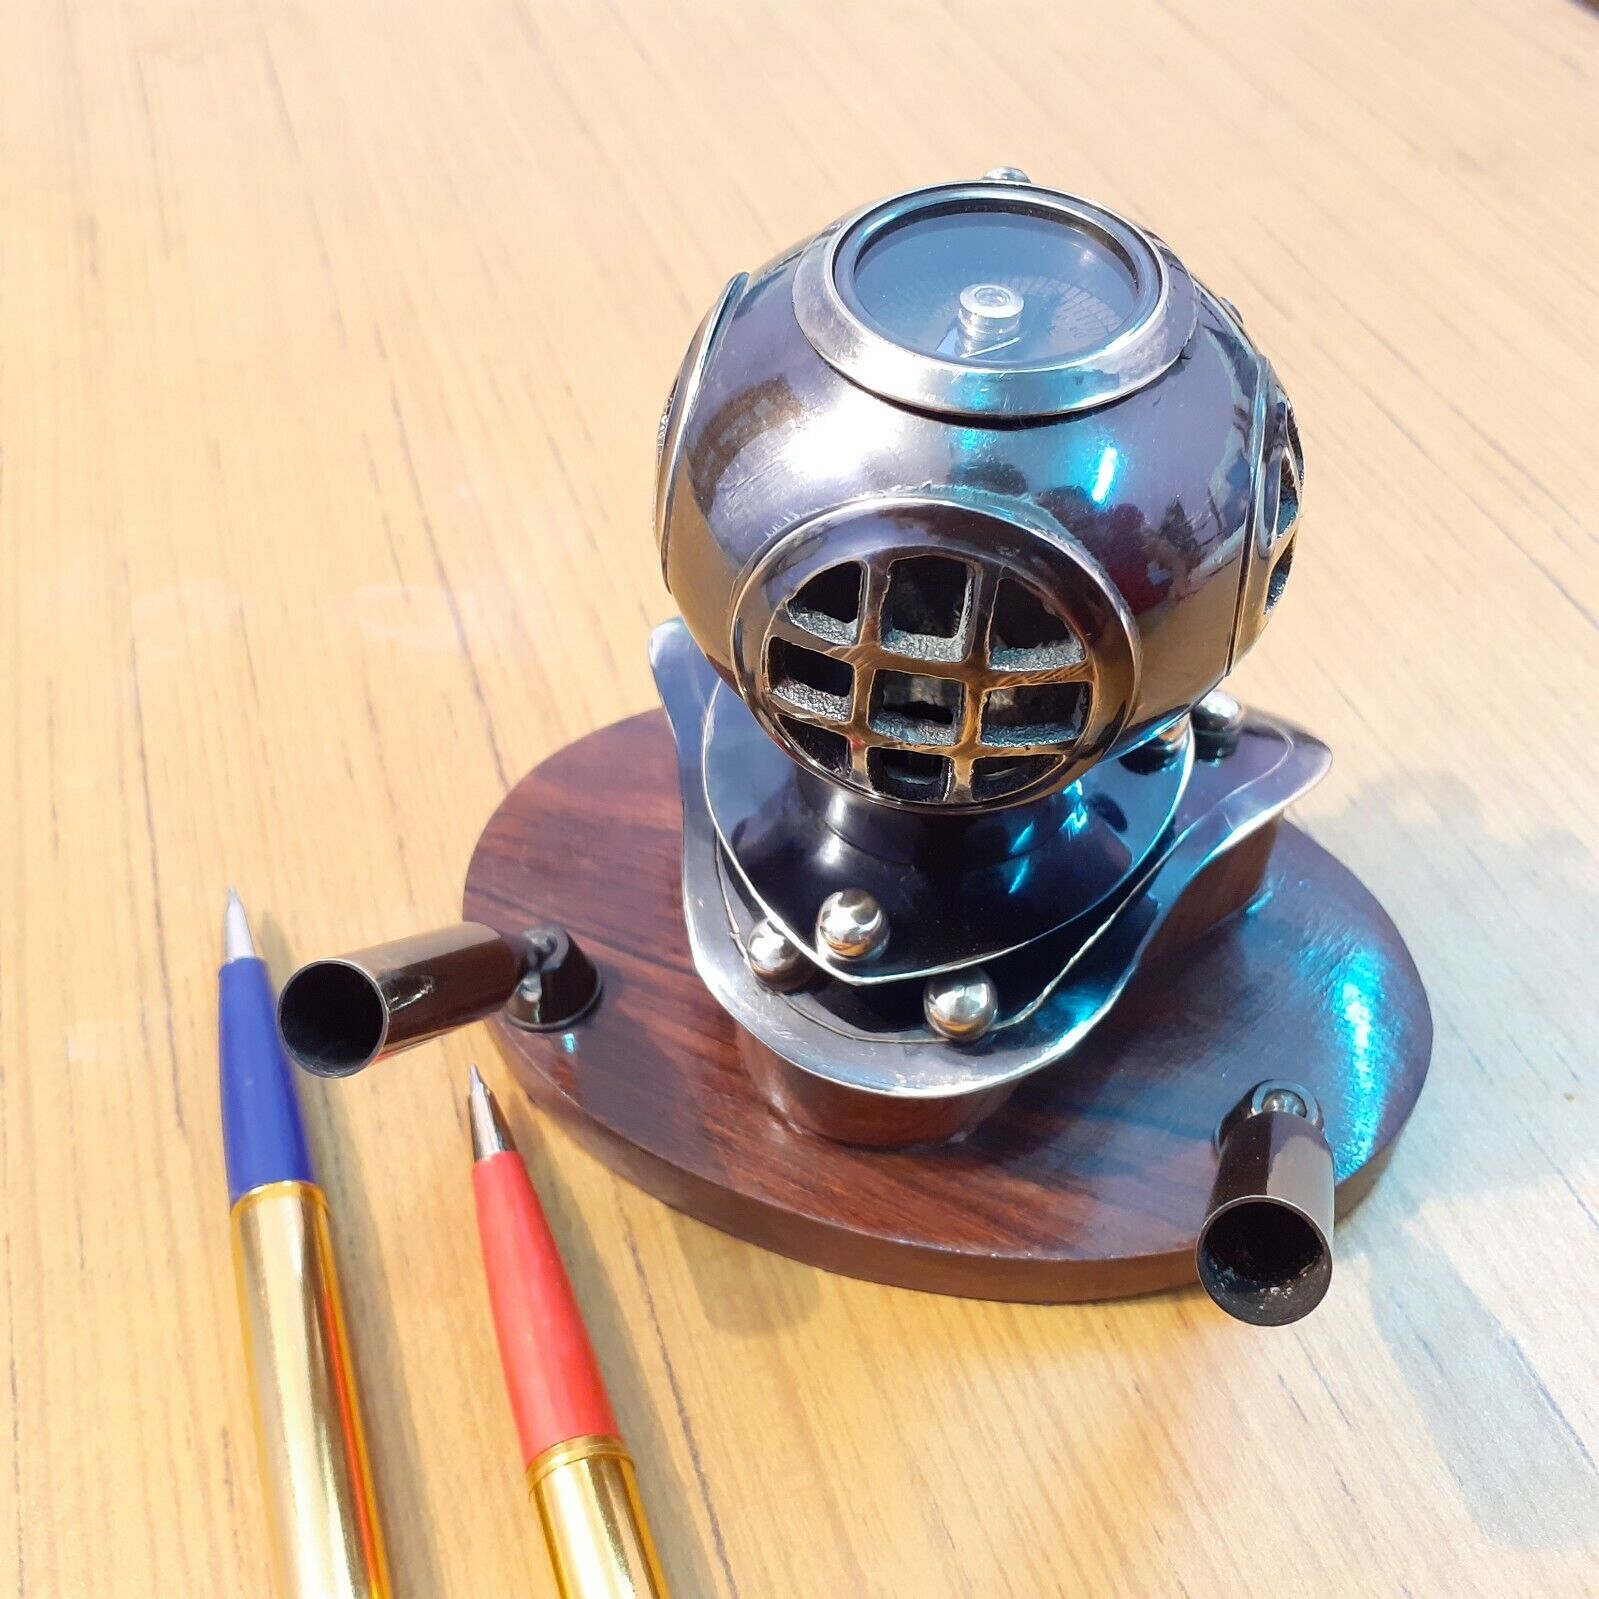 Antique Brass Pen Holder Diving Helmet With Compass Beautiful Table Top Item